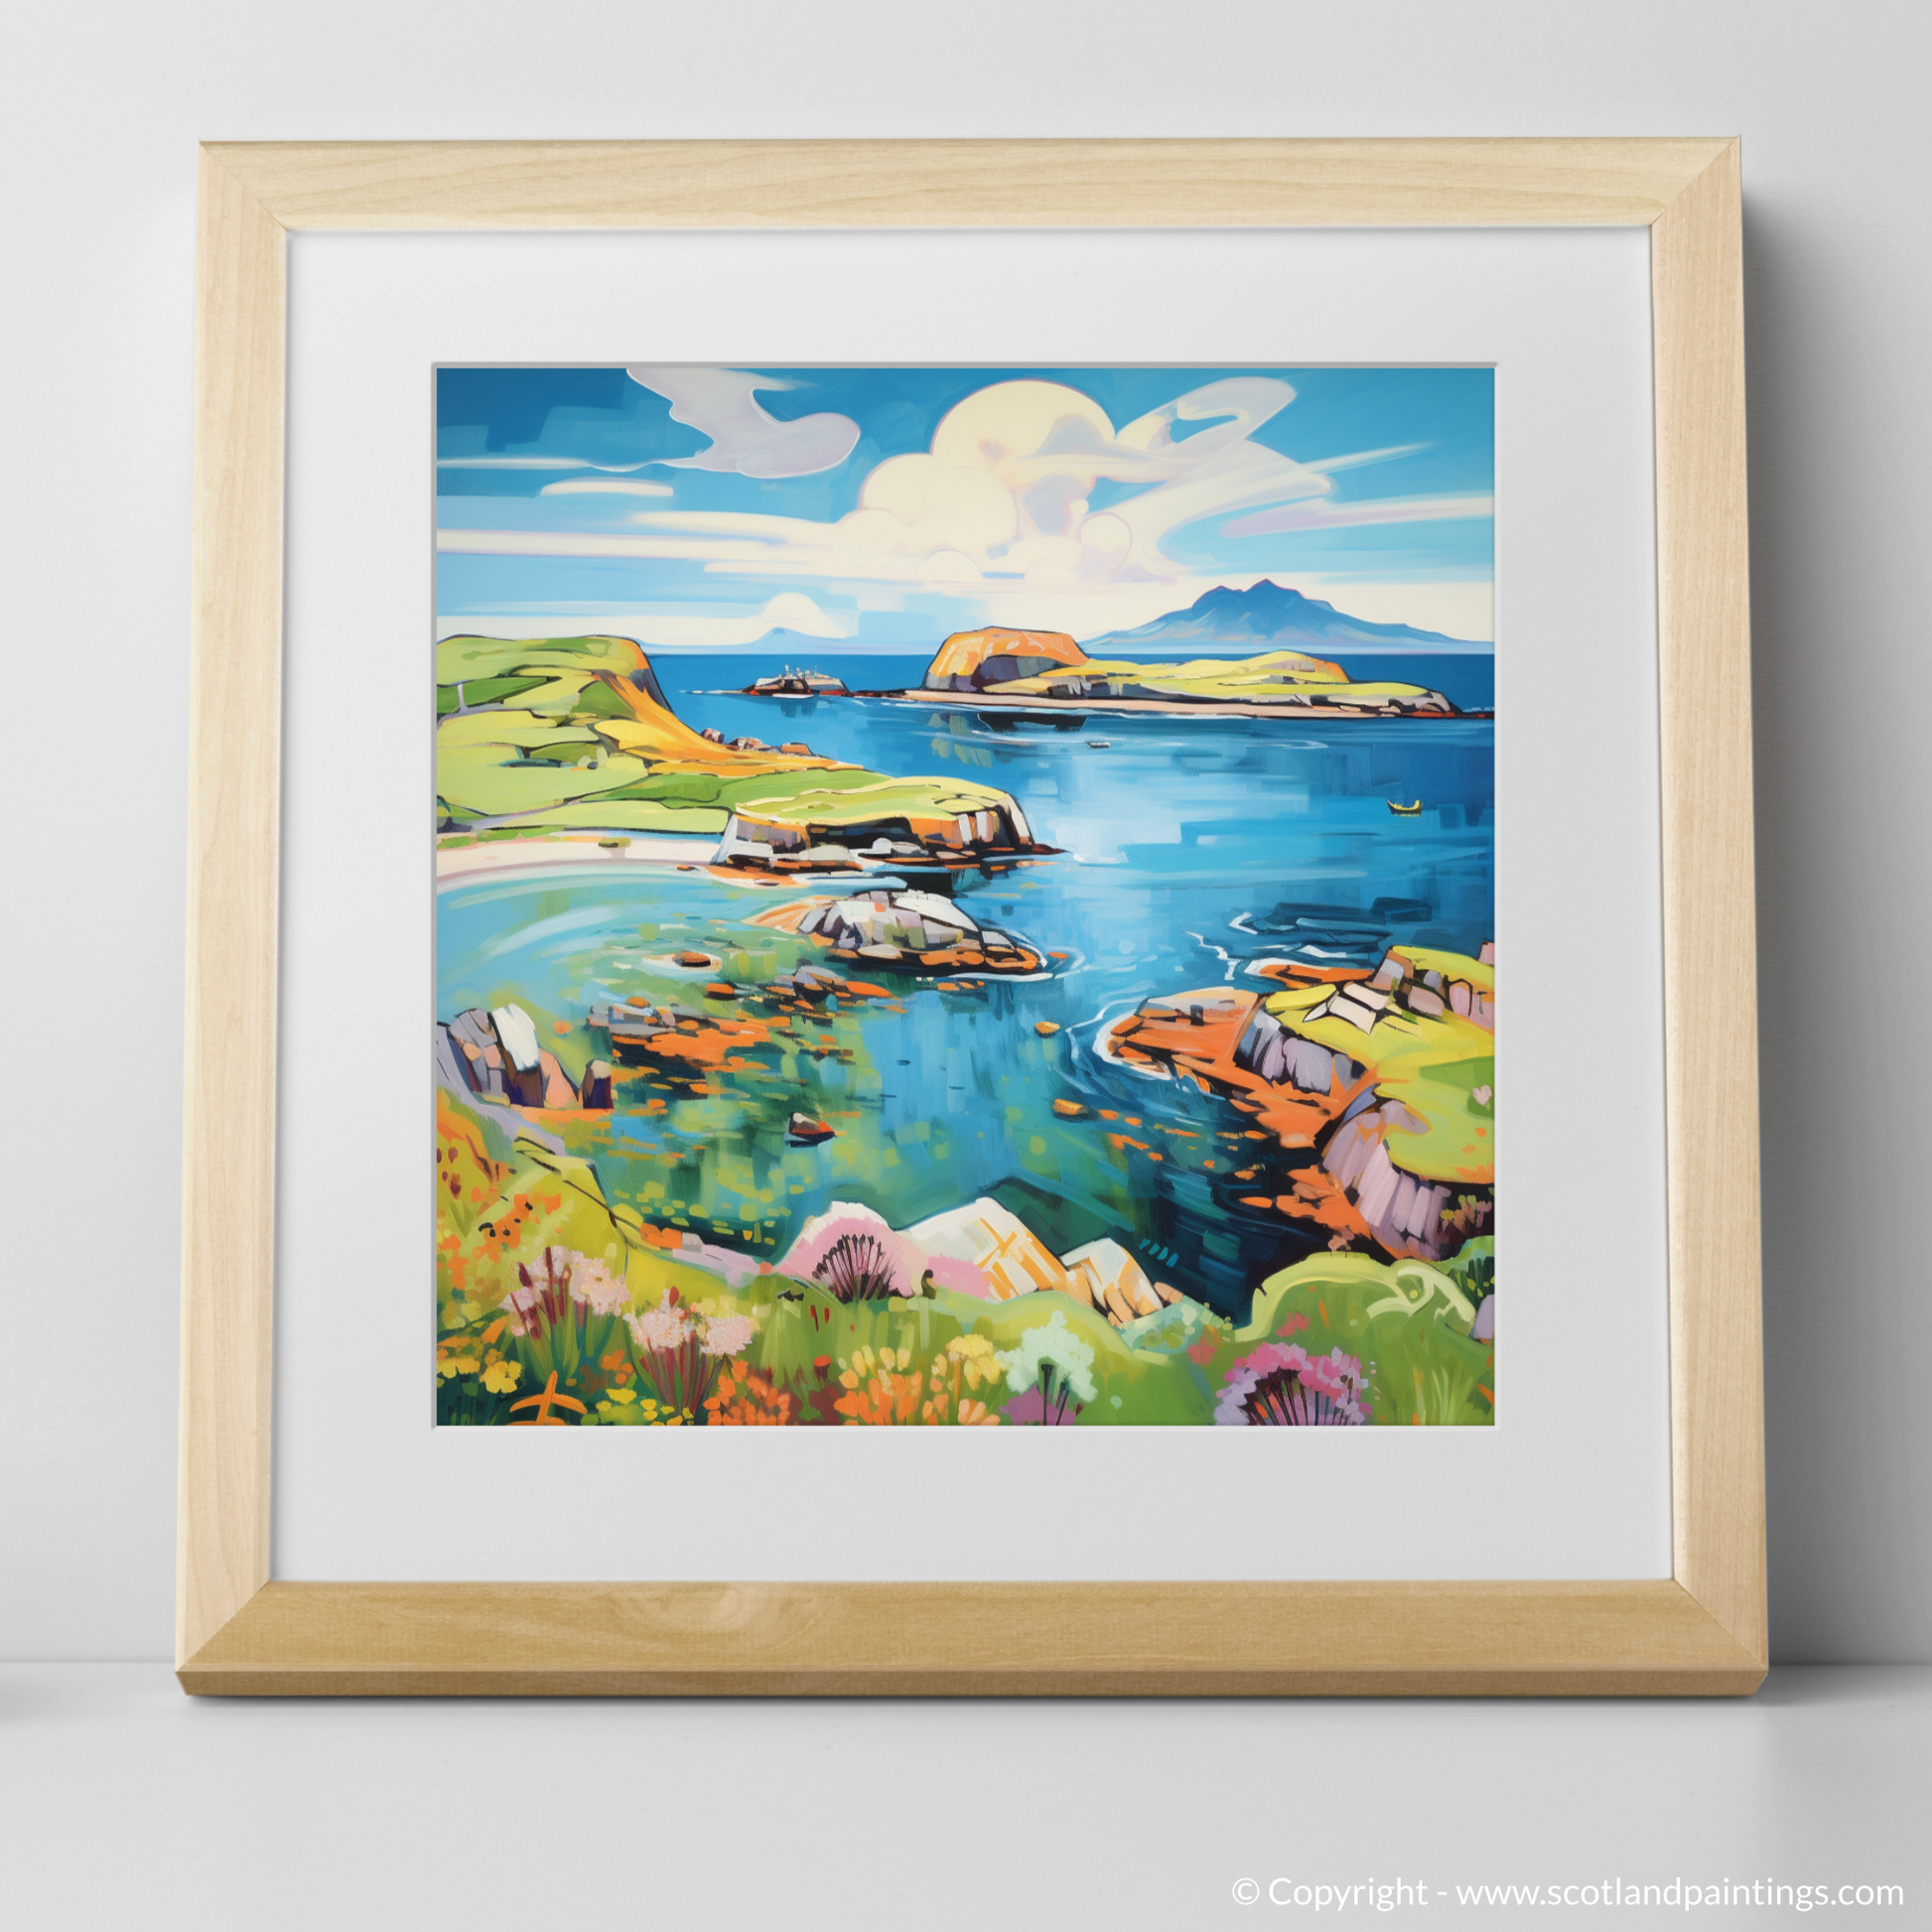 Art Print of Isle of Skyes smaller isles, Inner Hebrides in summer with a natural frame